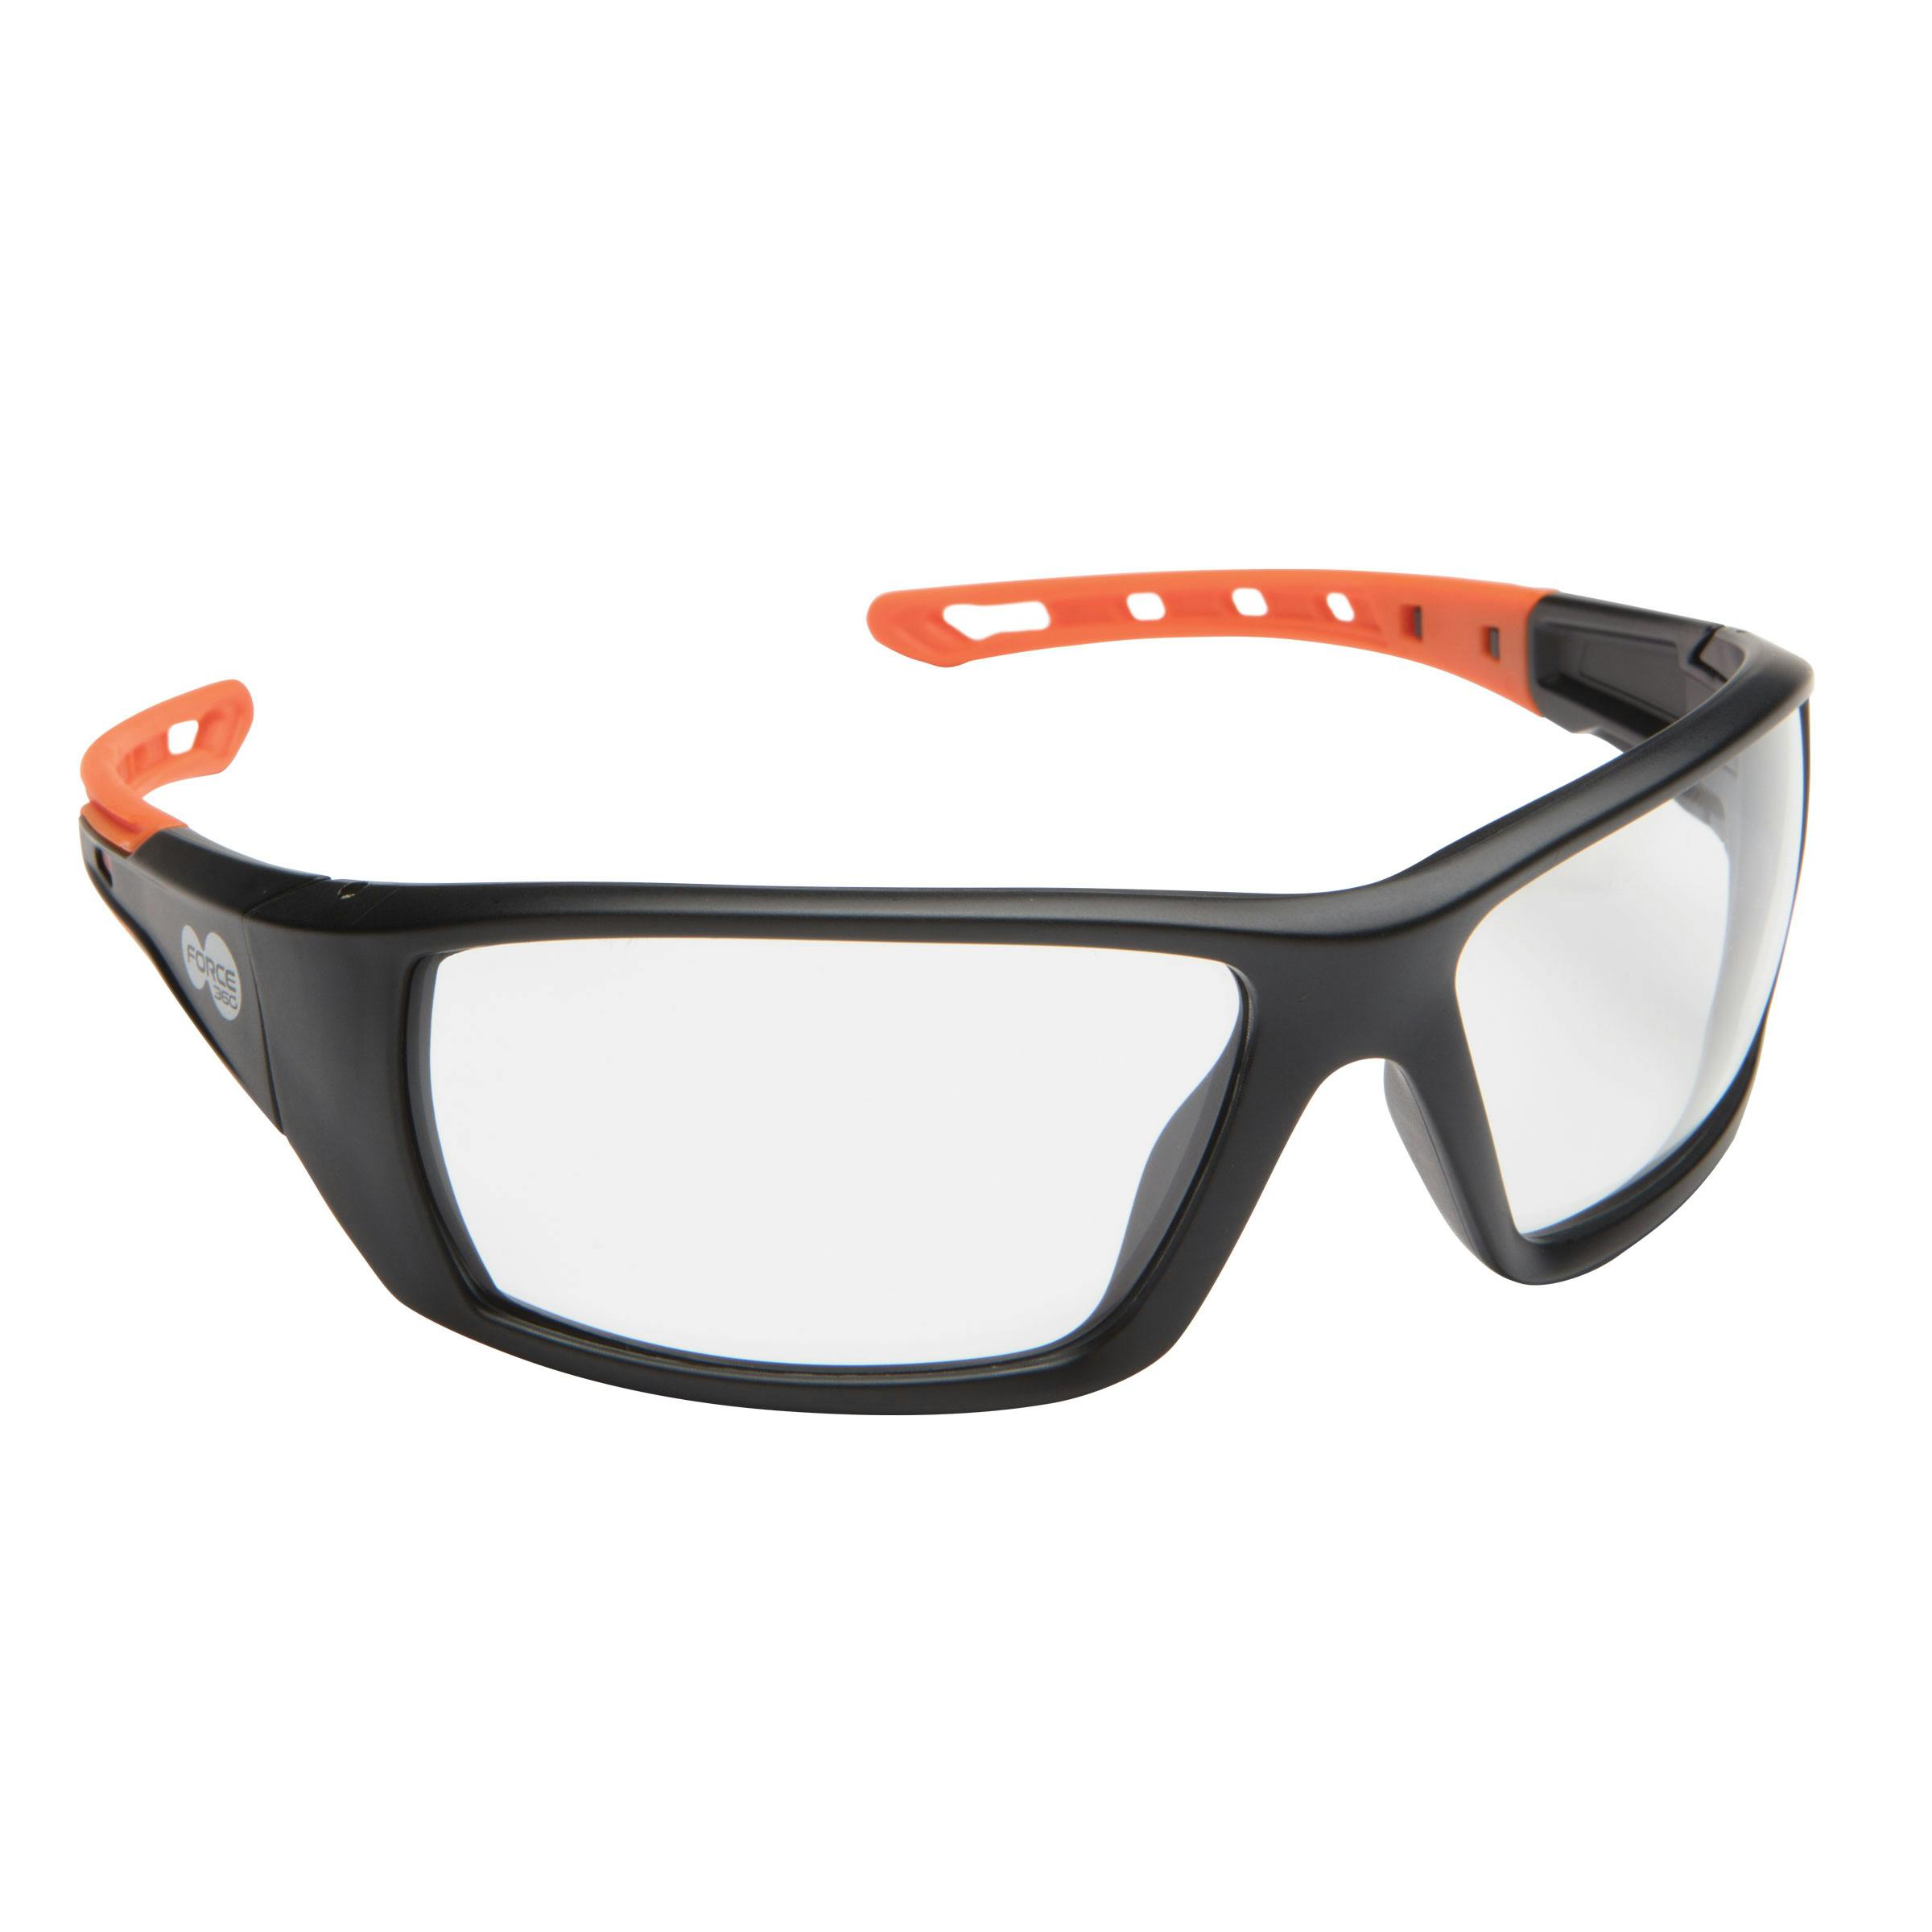 Force360 Mirage Safety Spectacle